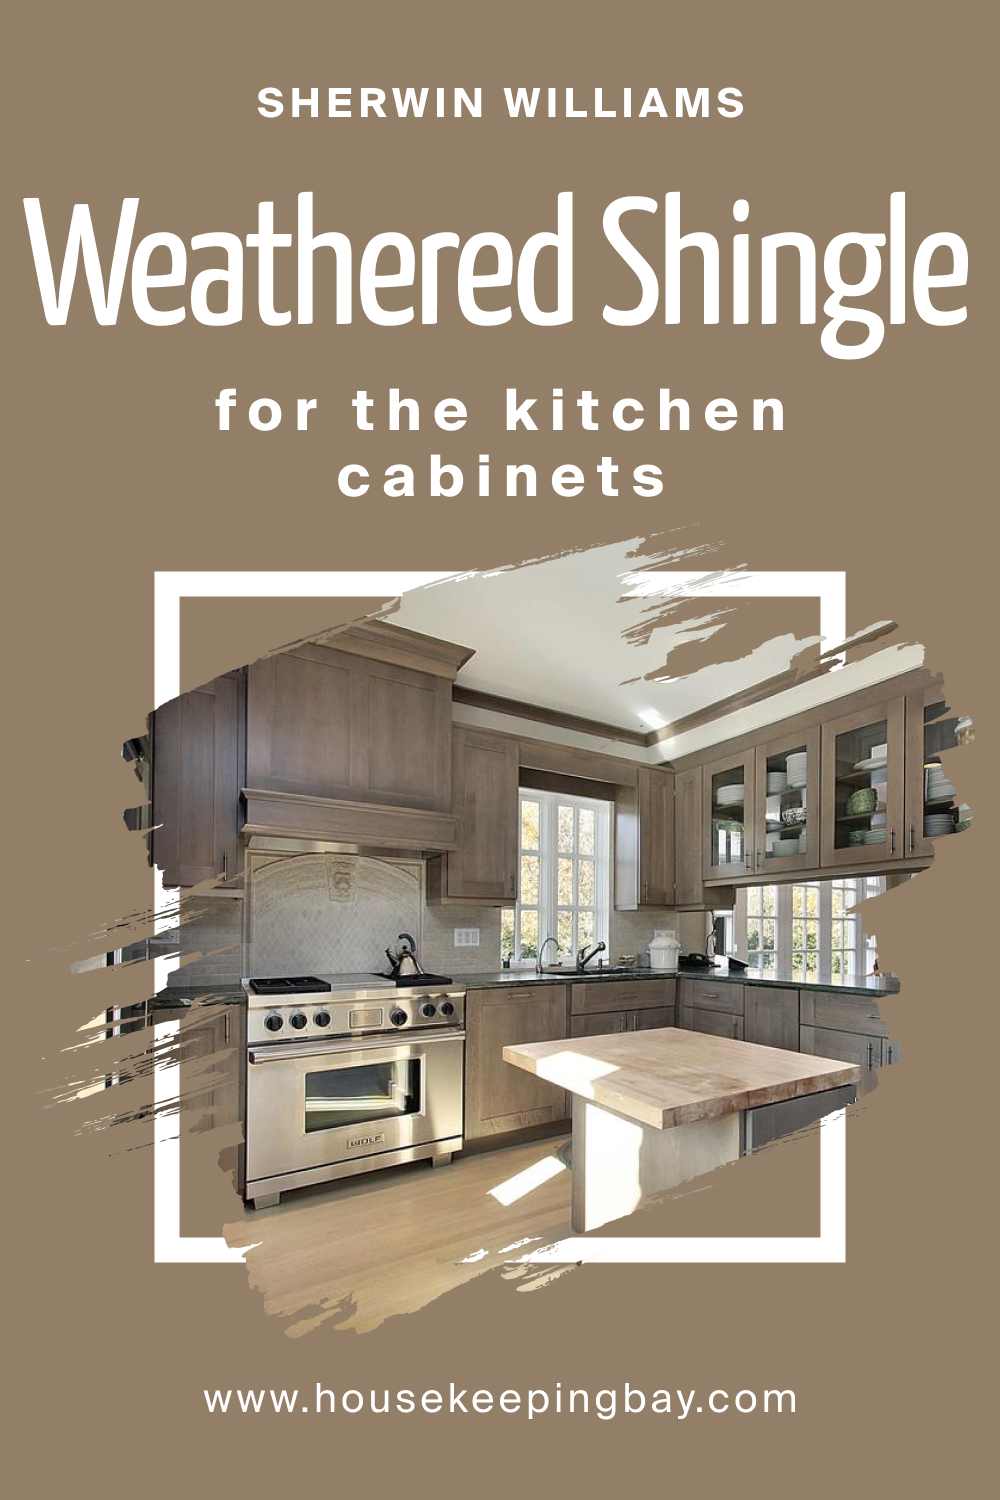 Sherwin Williams. SW 2841 Weathered Shingle For the Kitchen Cabinets